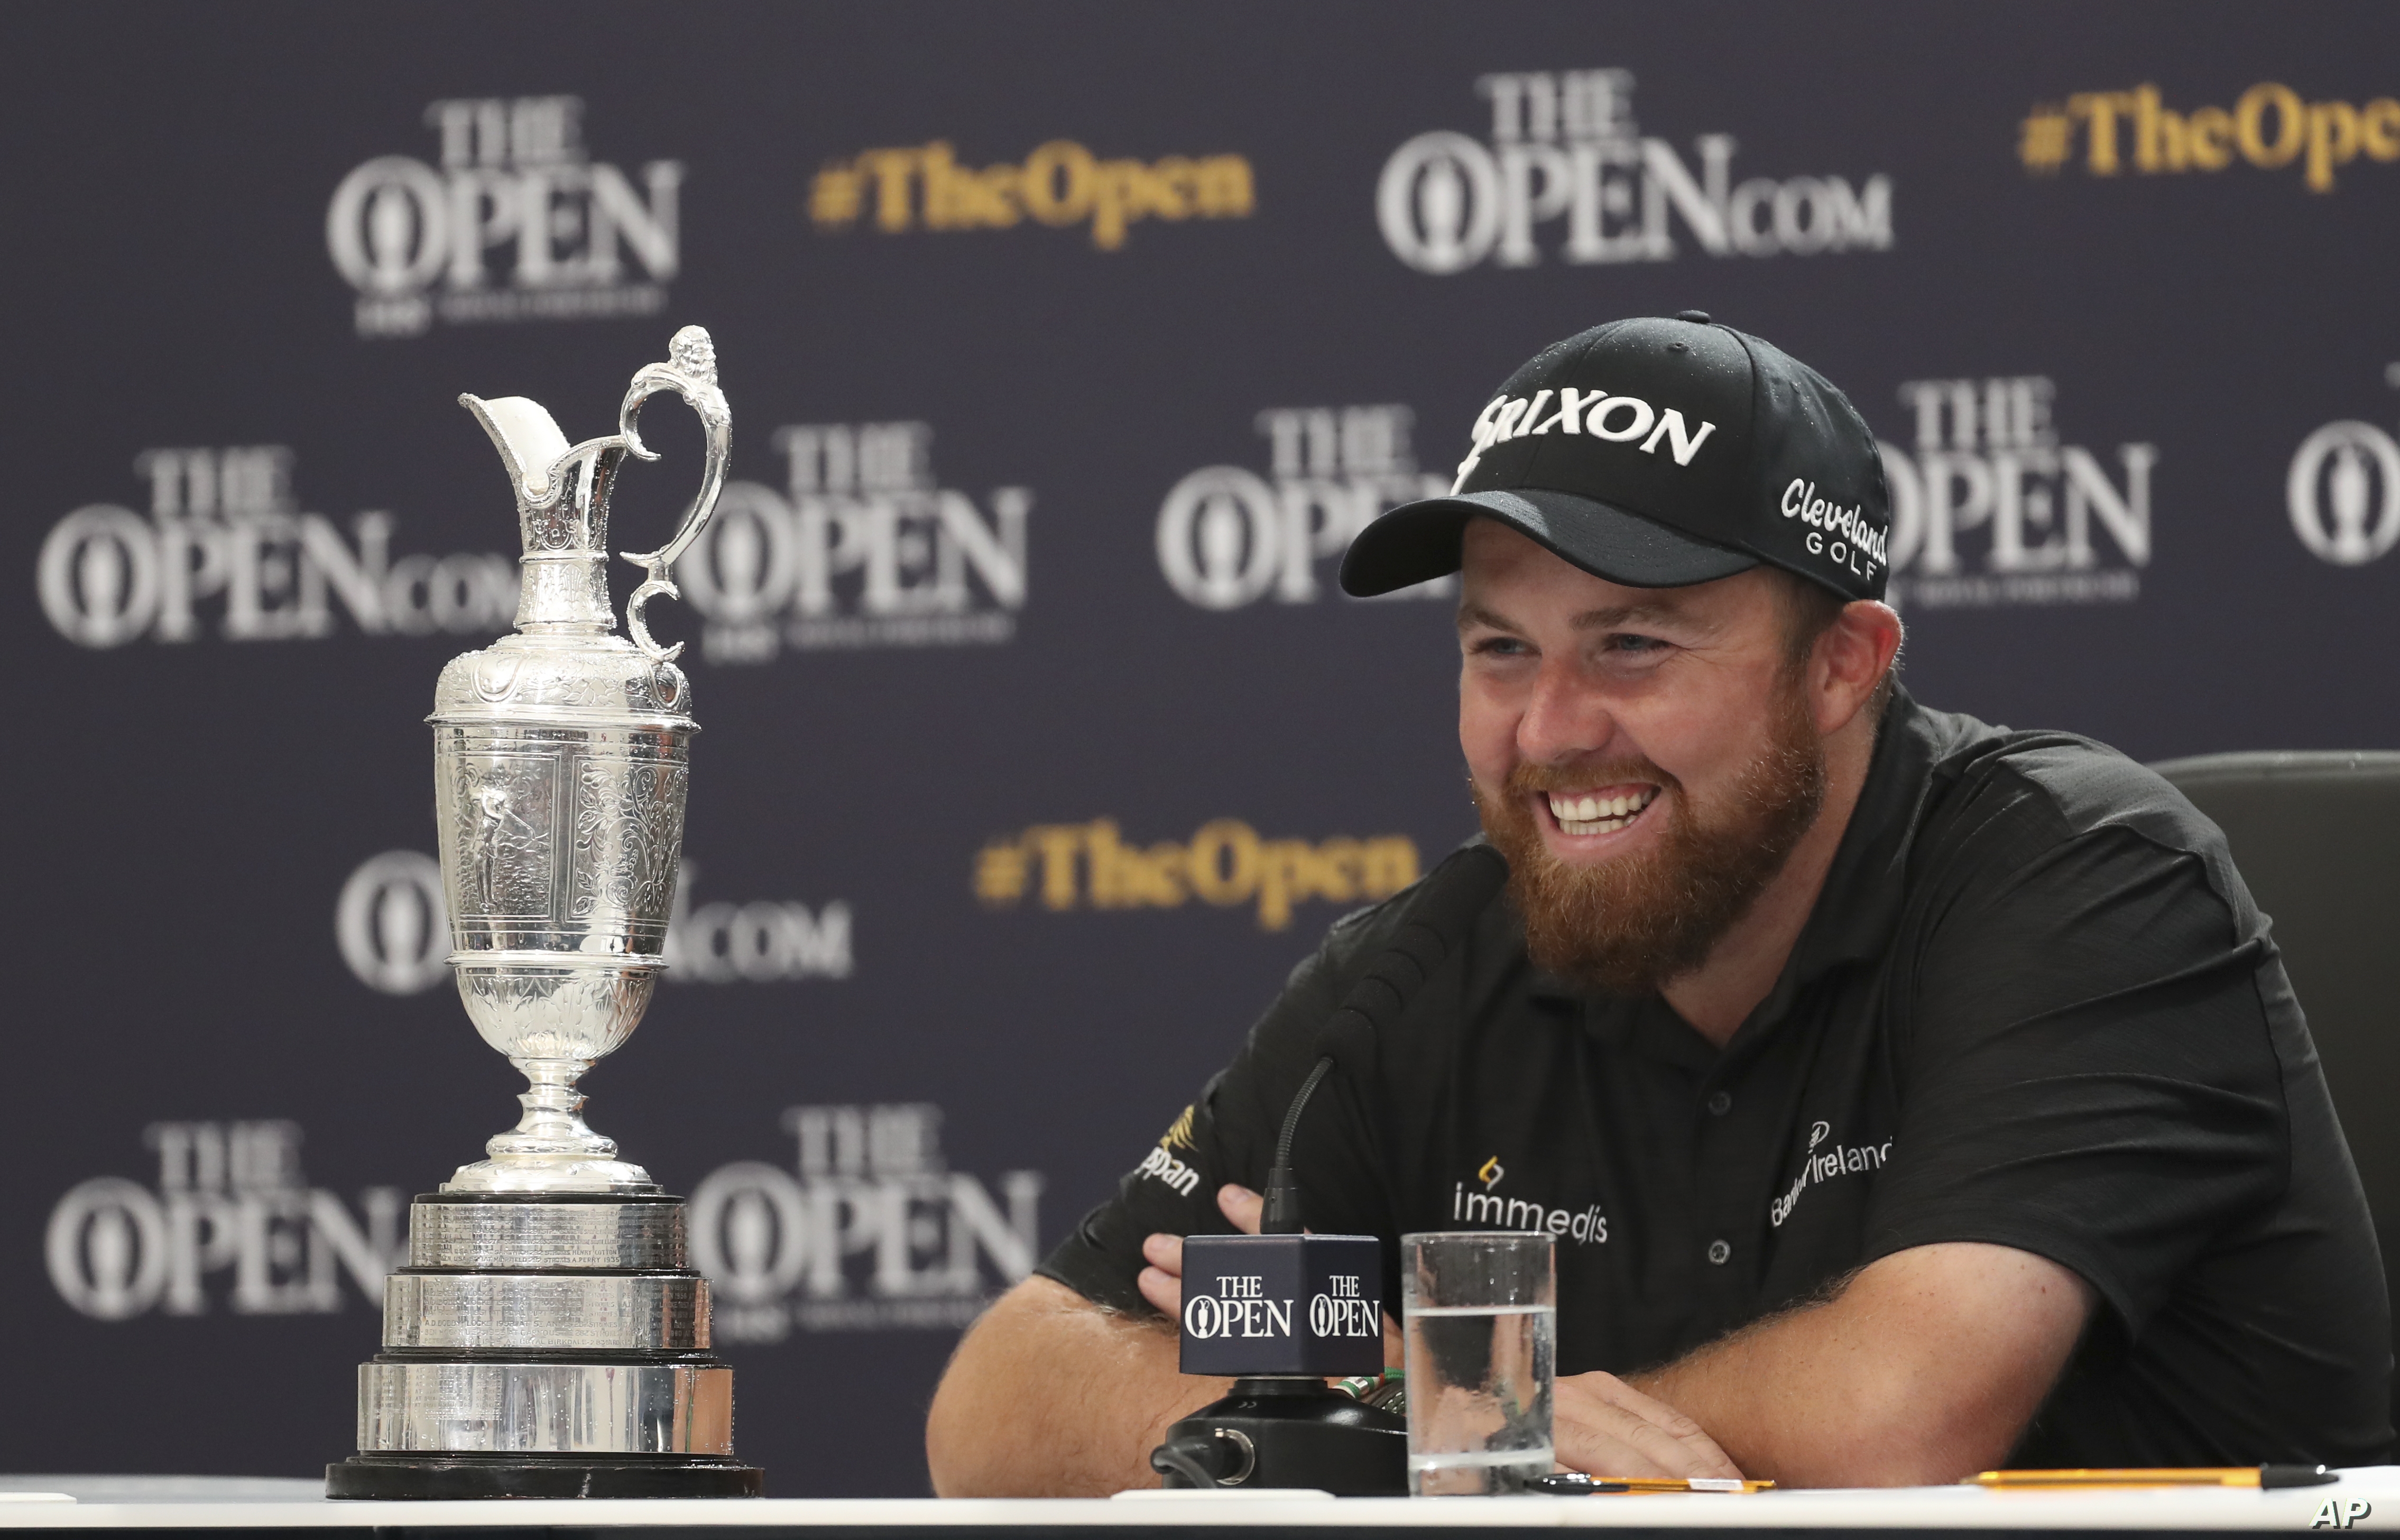 Shane Lowry signs multi-year extension with Srixon / Cleveland Golf